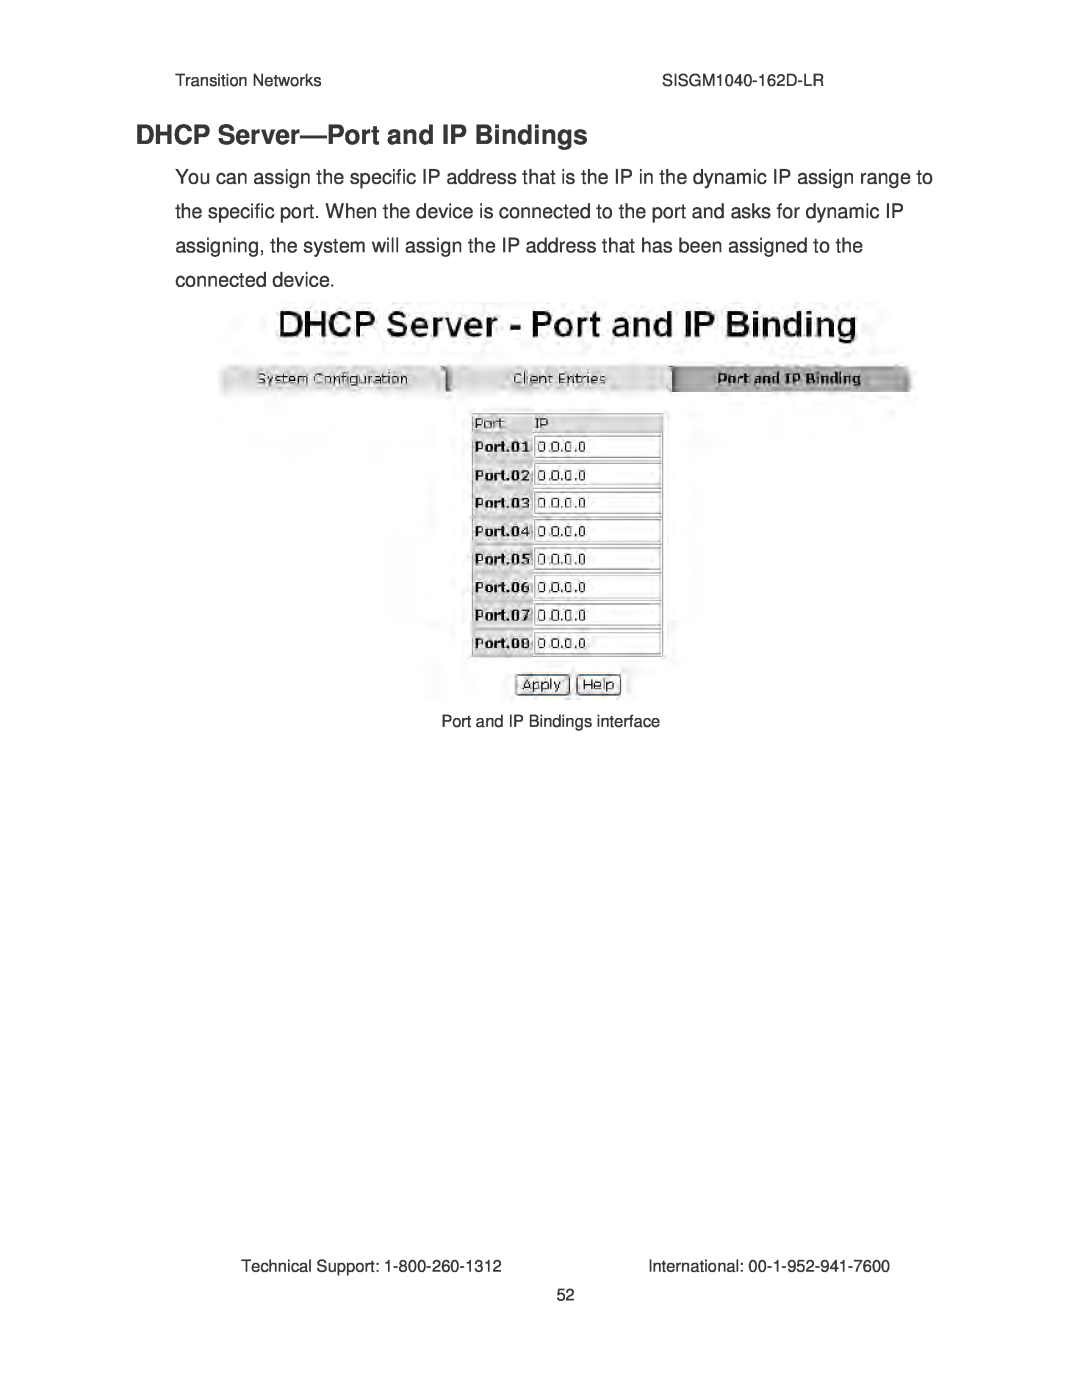 Transition Networks manual DHCP Server-Port and IP Bindings, Transition Networks, SISGM1040-162D-LR, Technical Support 